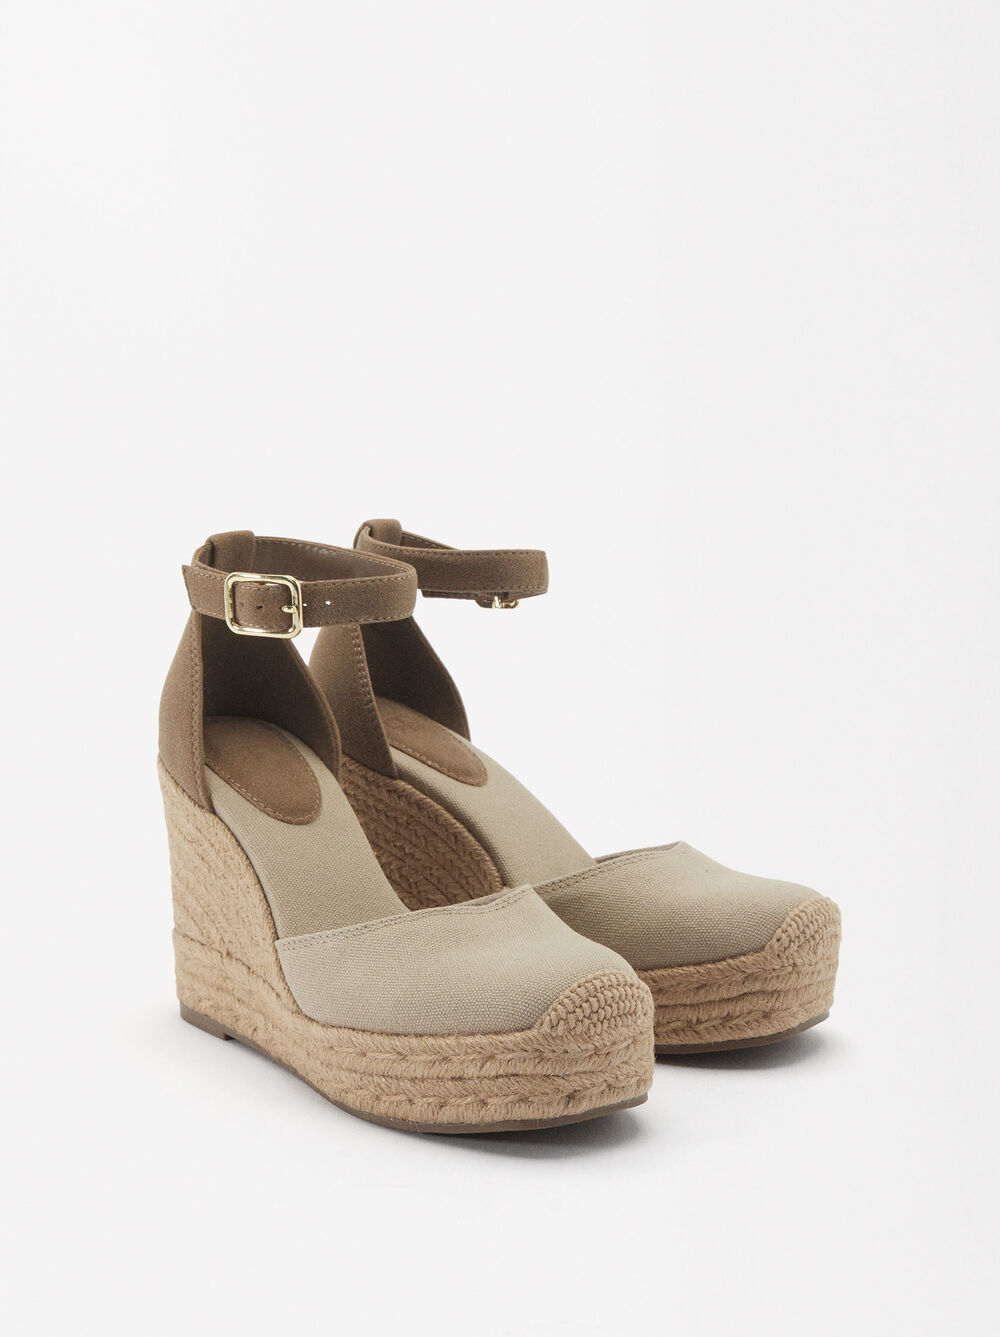 Wedges With Ankle Strap